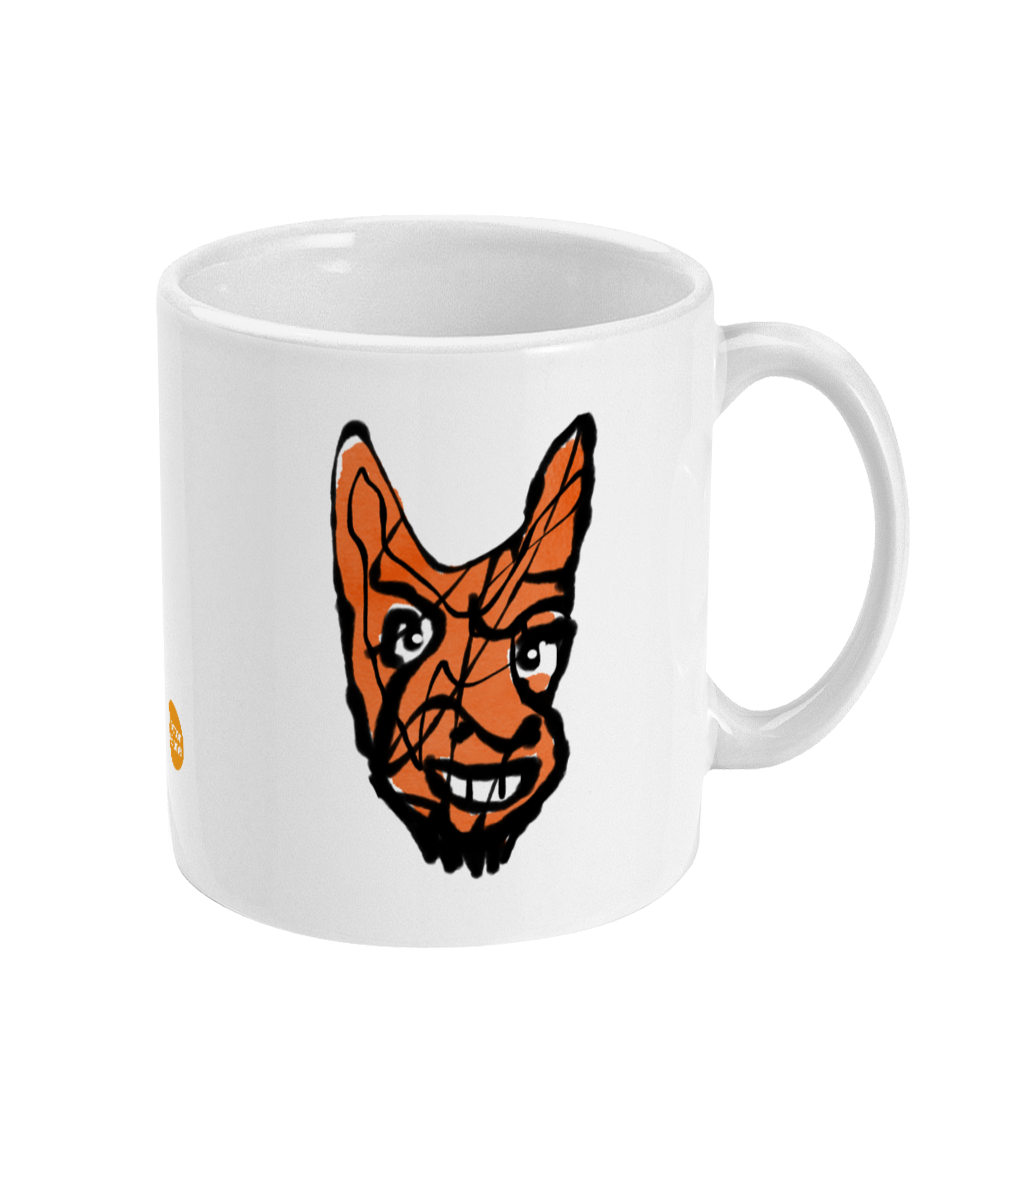 Cheeky Little Devil design coffee mug by Hector and Bone Right View